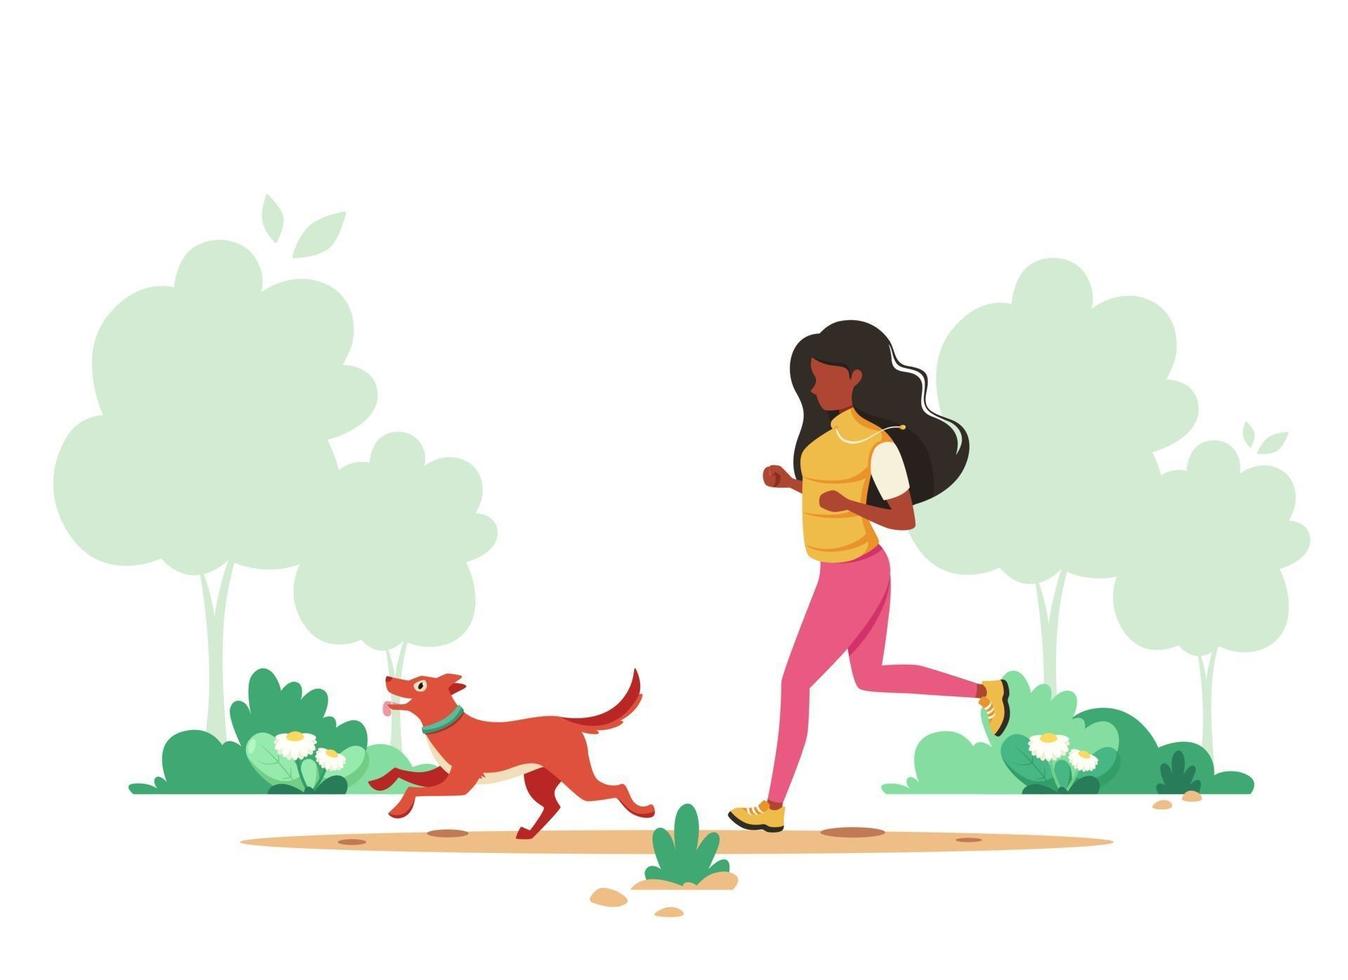 Black woman jogging with dog in spring park. Healthy lifestyle, sport, outdoor activity concept. Vector illustration.